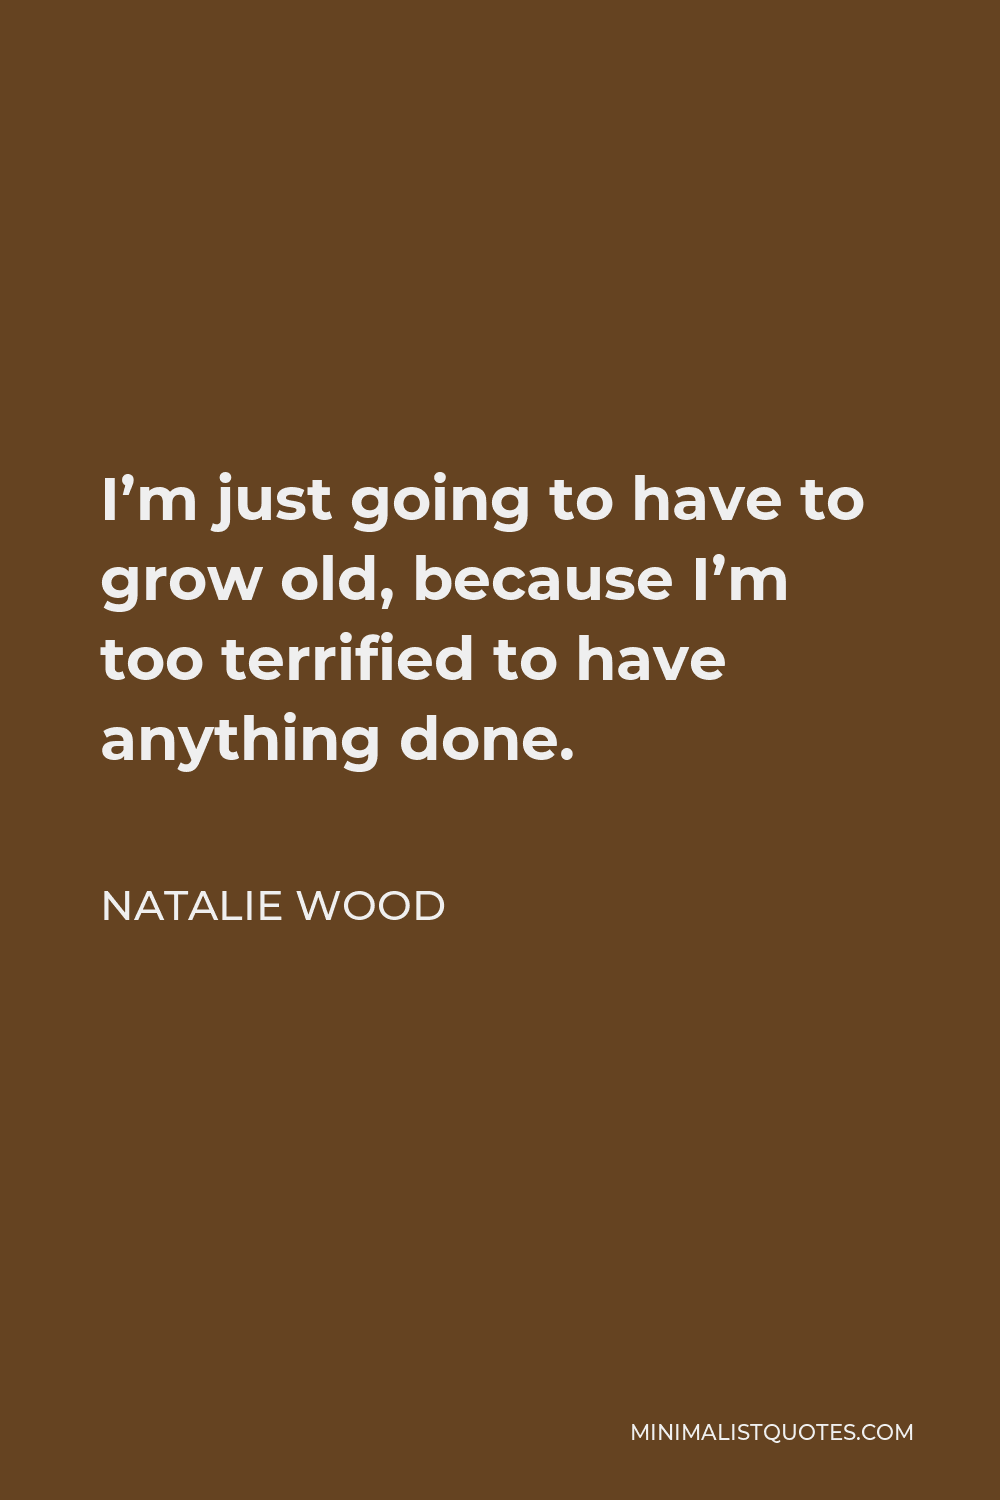 Natalie Wood Quote - I’m just going to have to grow old, because I’m too terrified to have anything done.